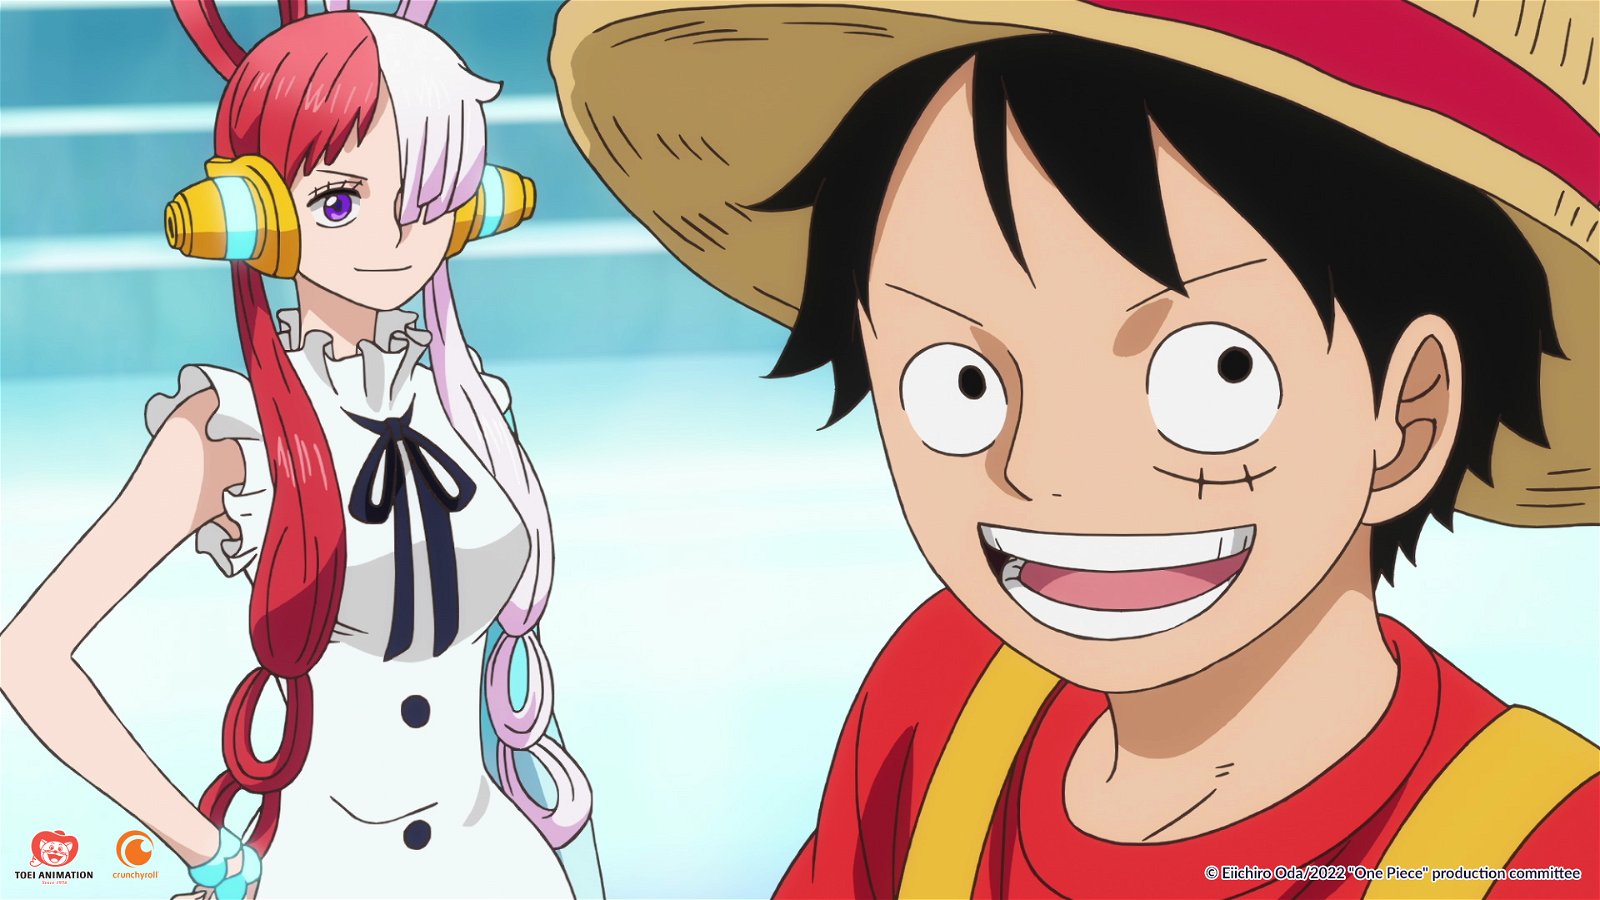 ONE PIECE FILM RED Selected as Centerpiece Screening at Animation Is Film Fesival